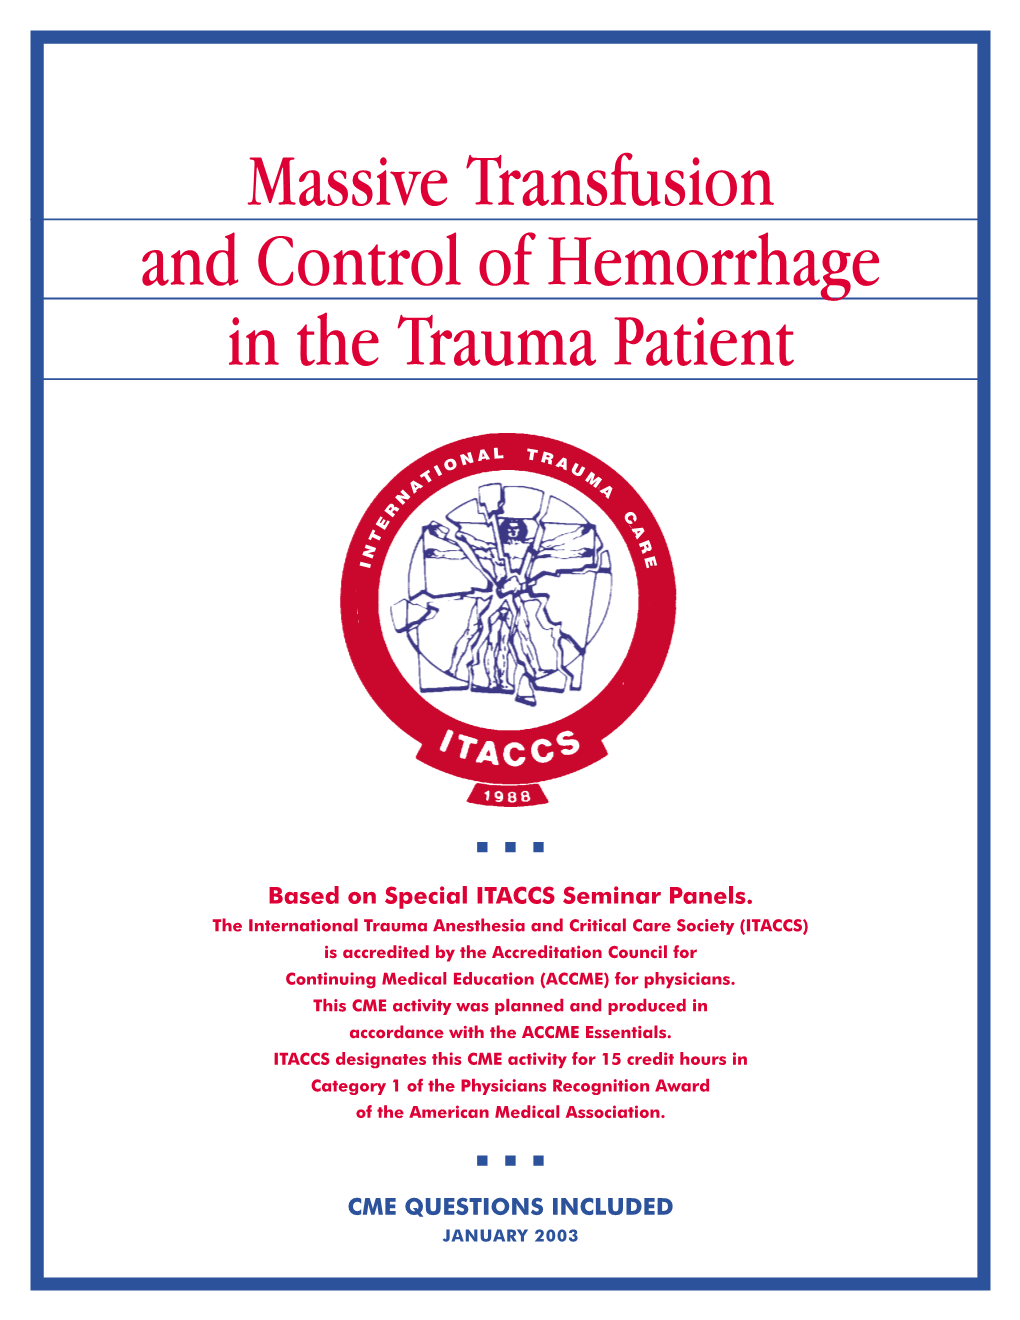 Massive Transfusion and Control of Hemorrhage in the Trauma Patient